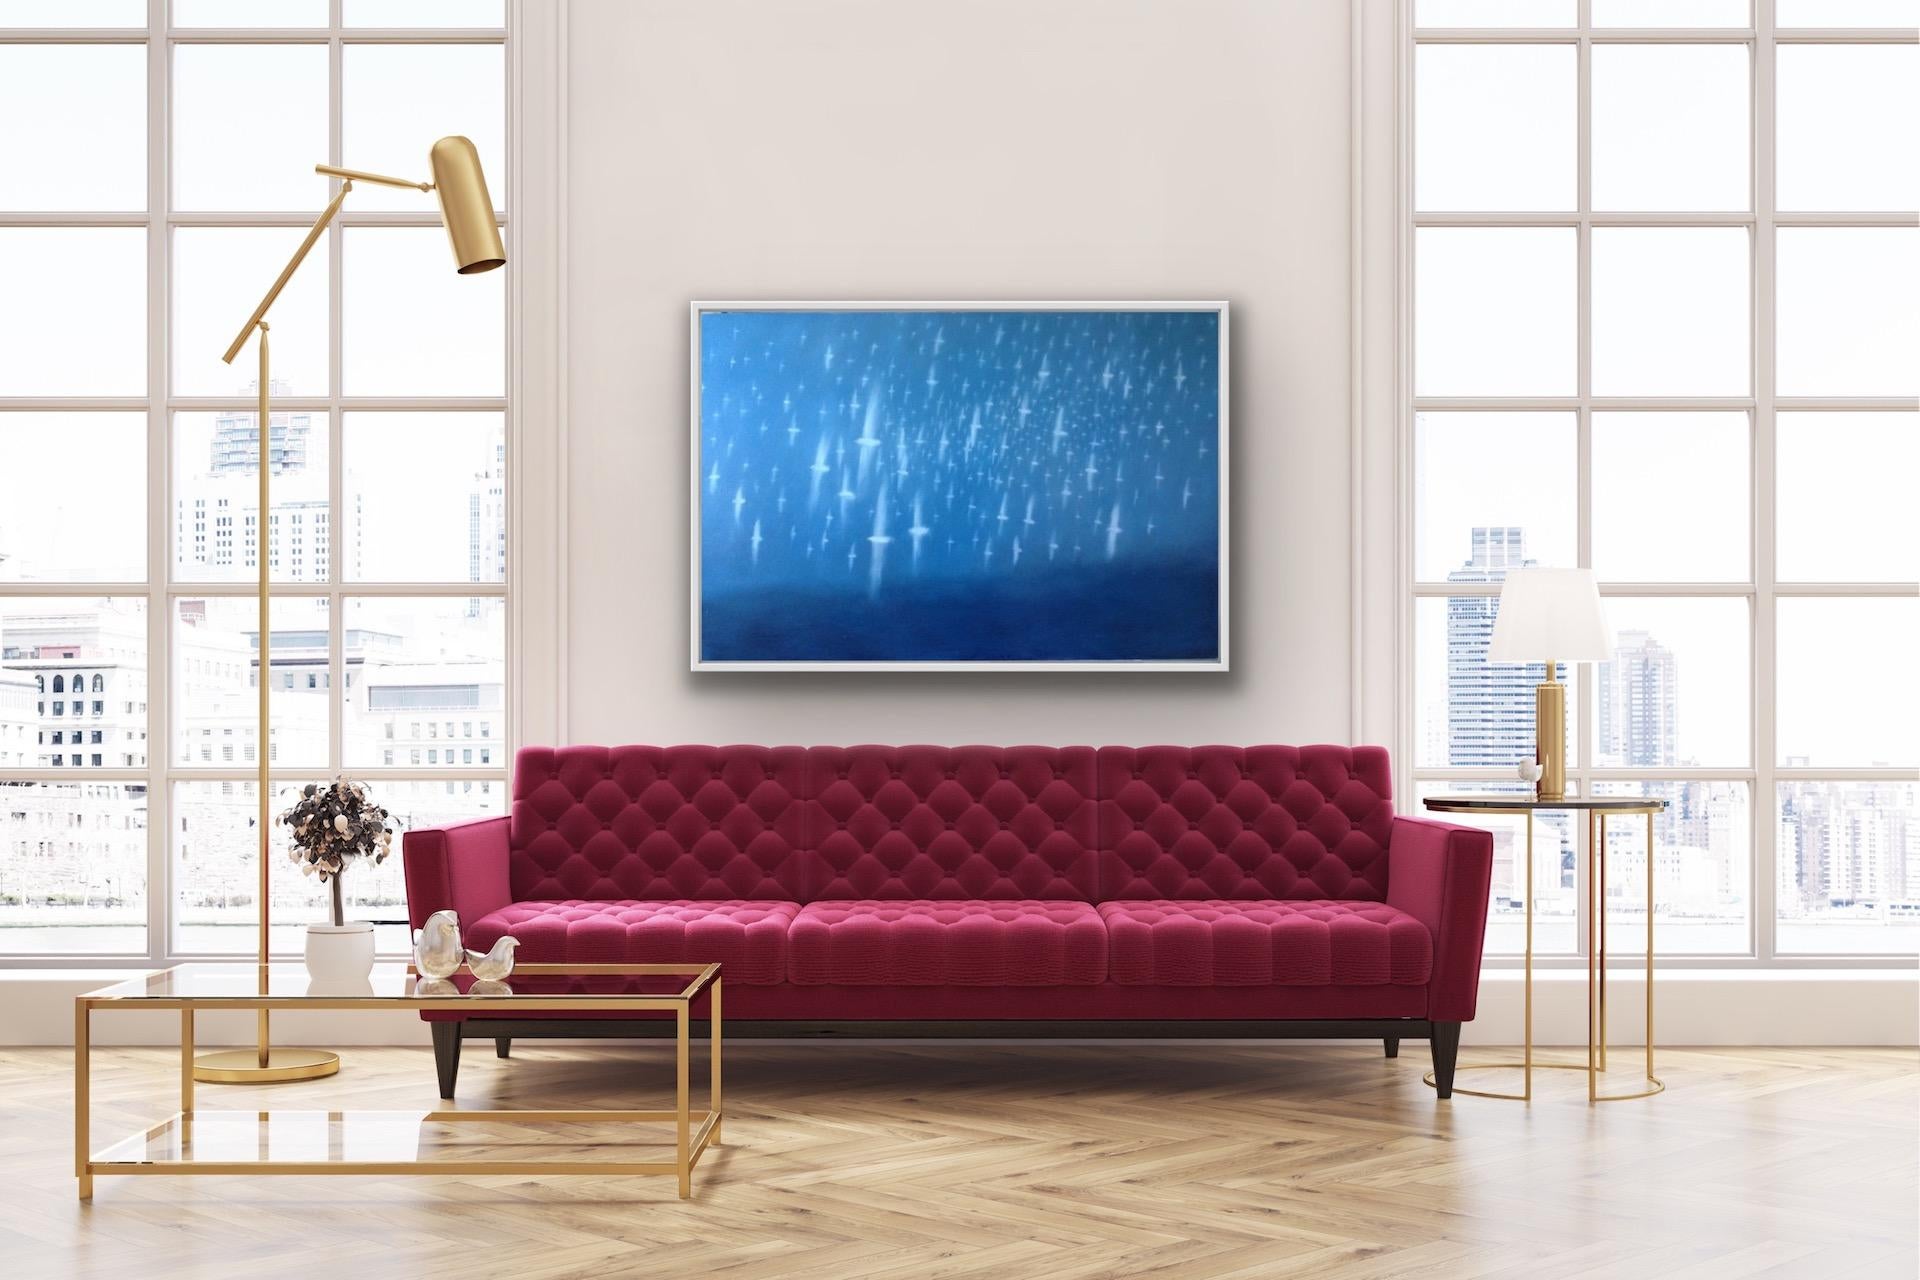 Charlie Baird 
Migration 
Original Painting
Canvas Size: H 81cm x W 122cm
Sold Unframed
(Please note that in situ images are purely an indication of how a piece may look).

Migration is an abstract /figurative seascape with birds and sea Inspired by